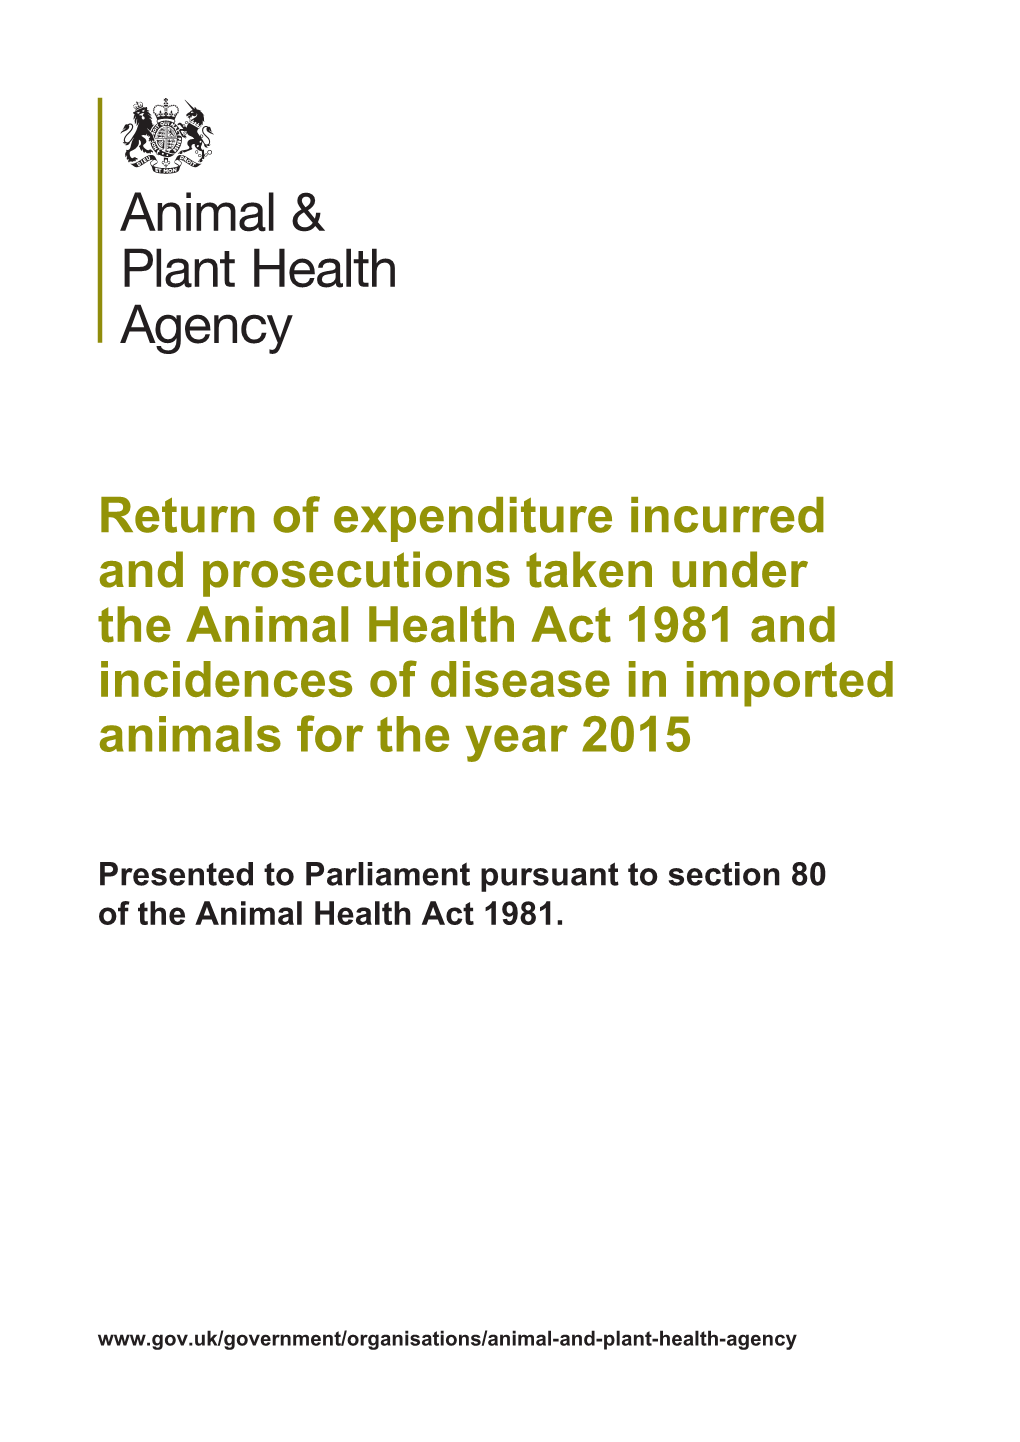 Return of Expenditure Incurred and Prosecutions Taken Under the Animal Health Act 1981 and Incidences of Disease in Imported Animals for the Year 2015